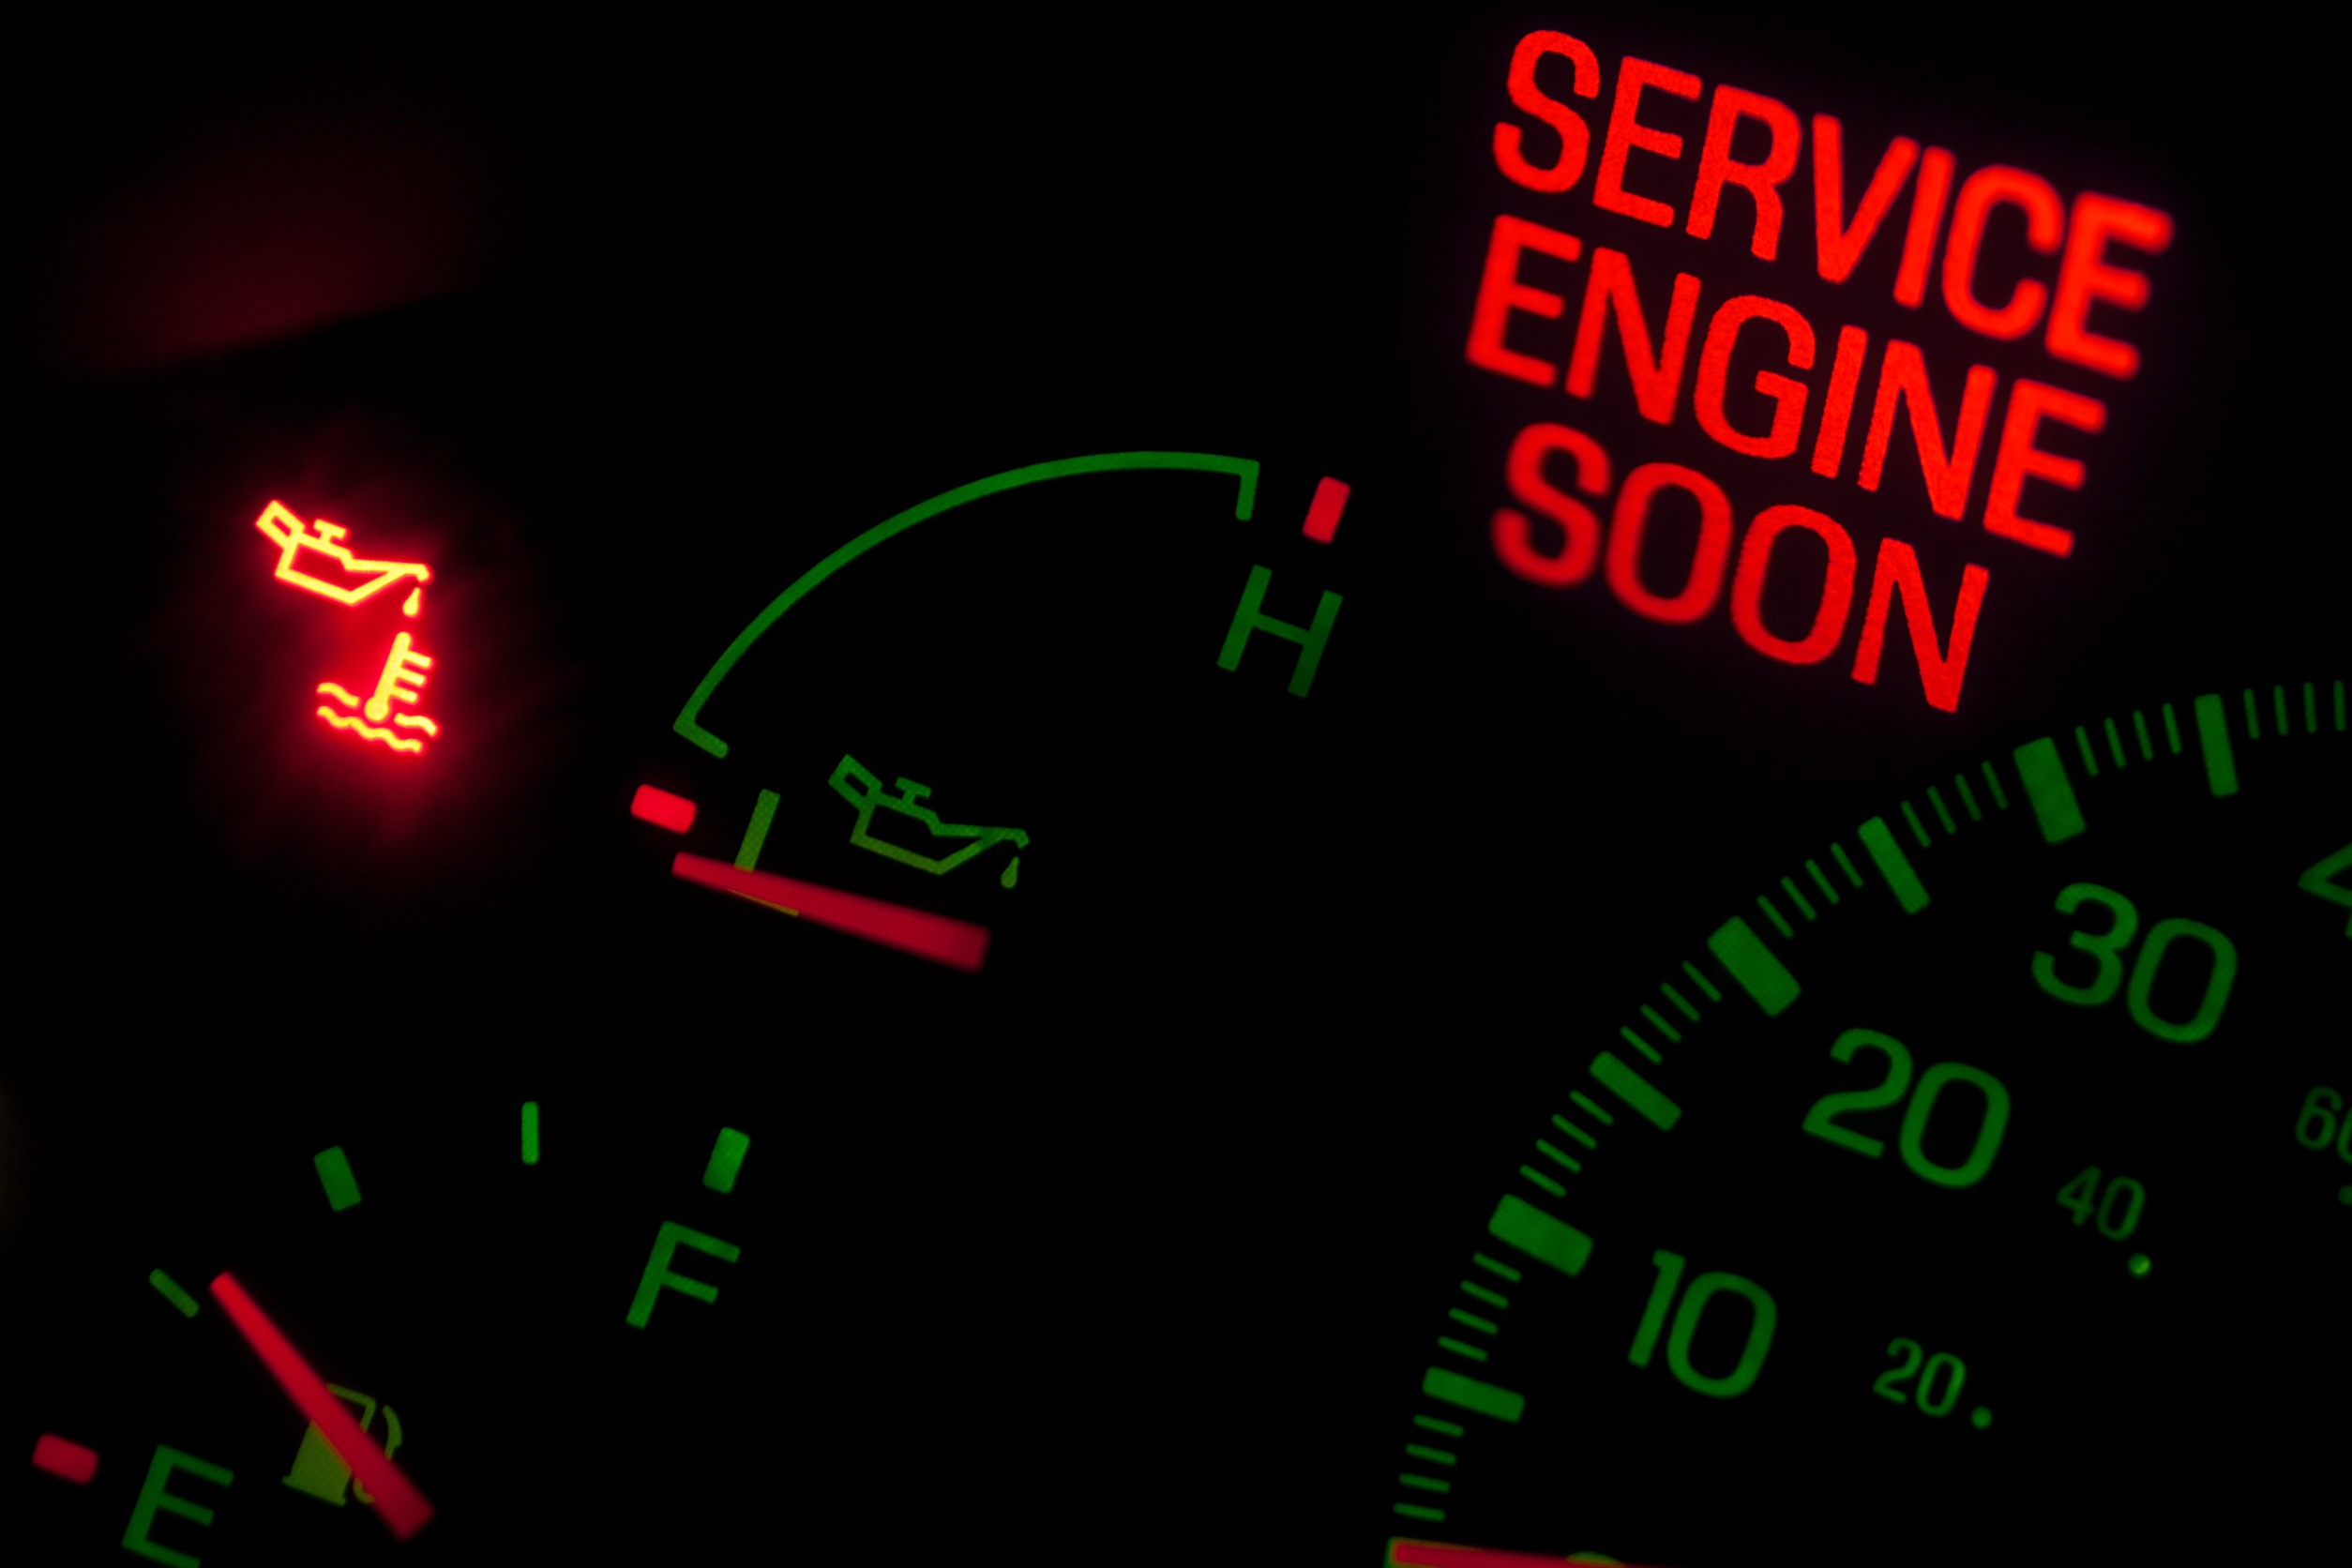 Where to go in Broomfield if Service Engine Soon Lights?